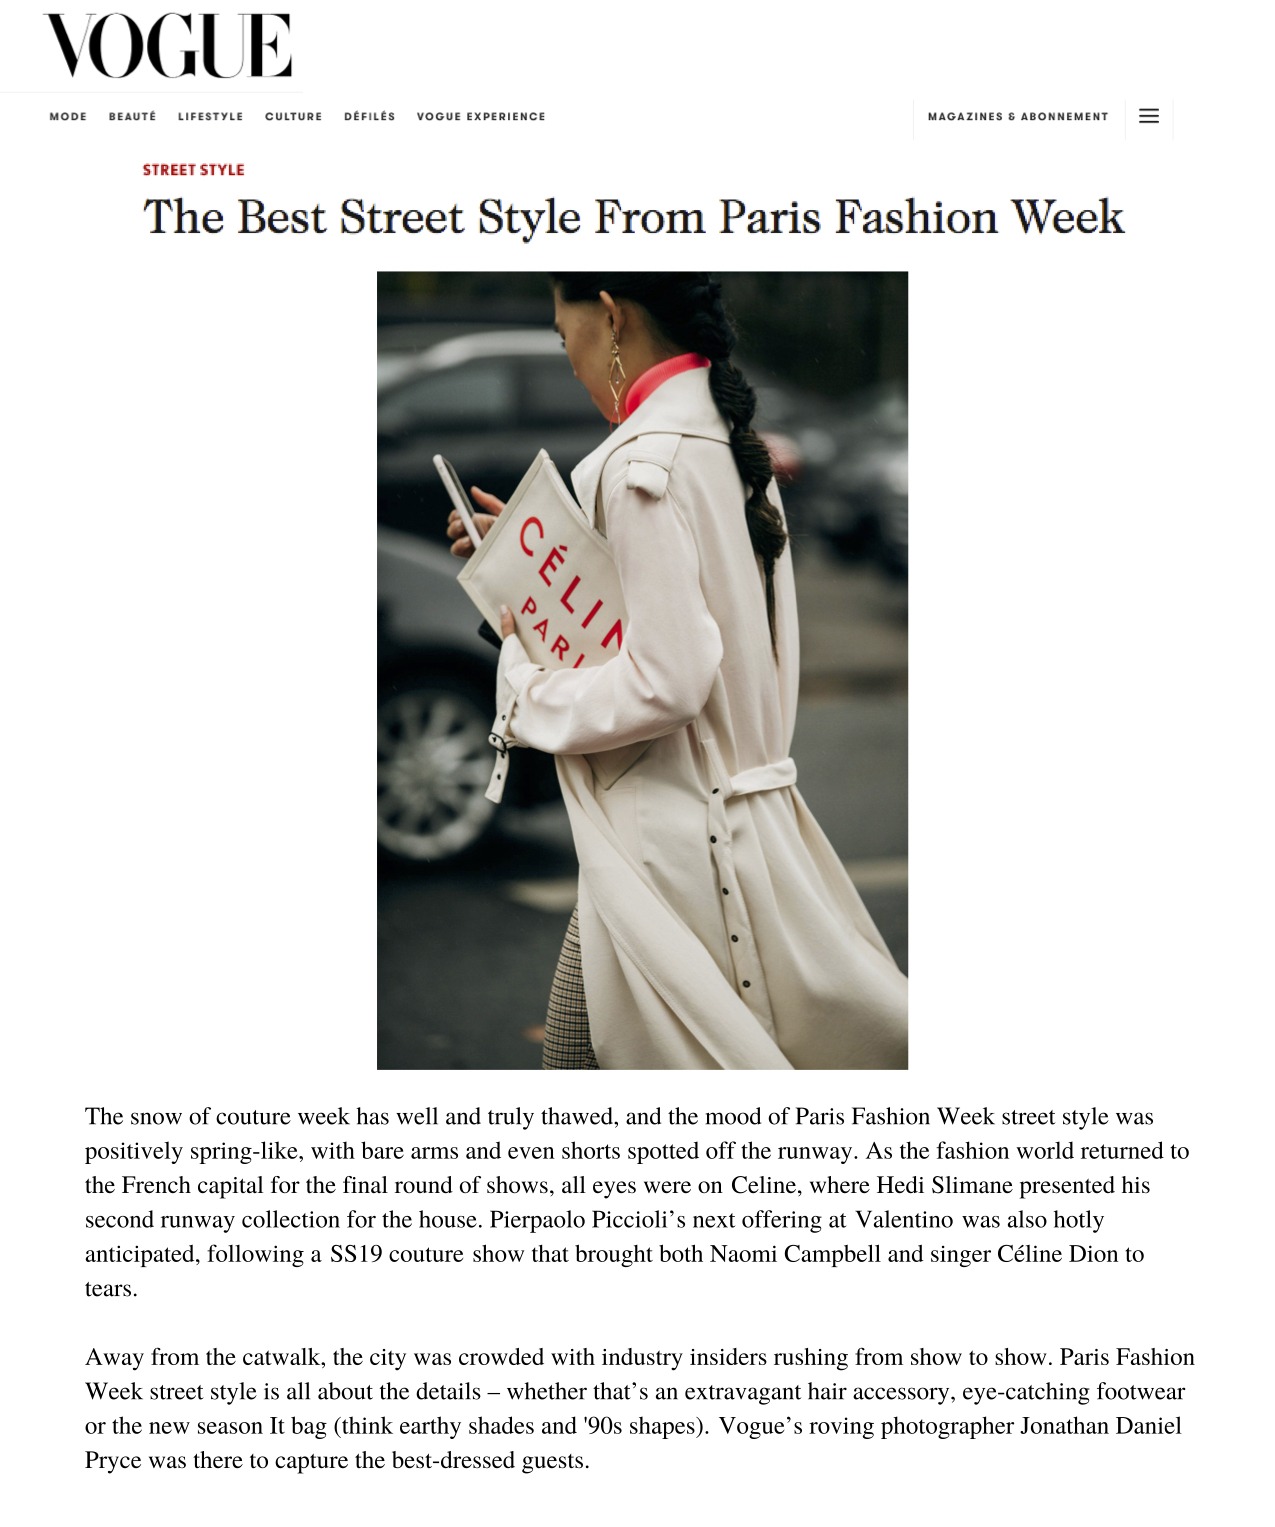 Vogue UK: The Best Street Style From Paris Fashion Week